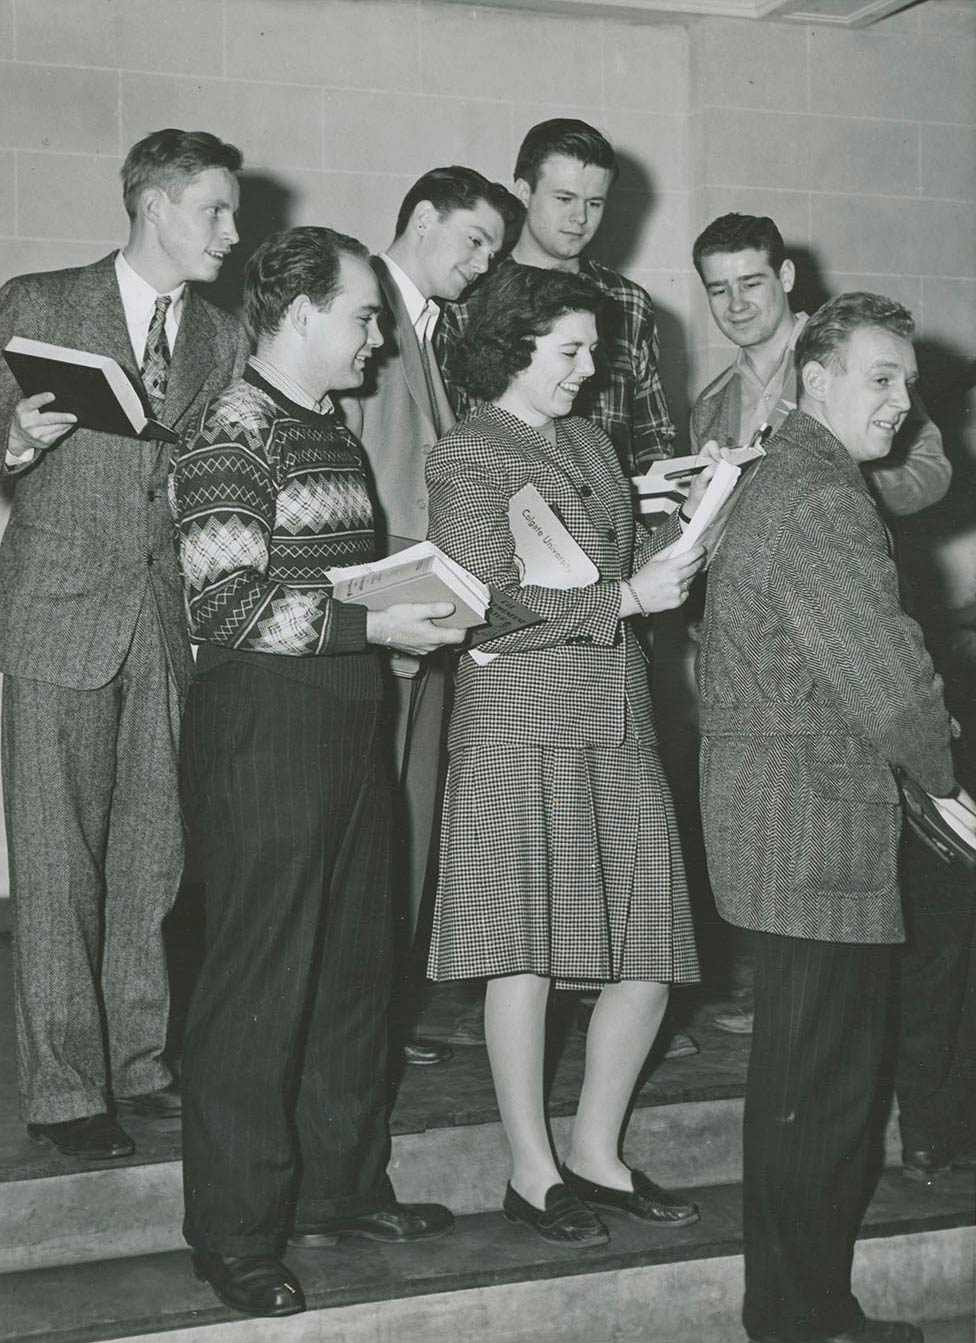 Helen Craven Mues signs autographs for male students, 1946